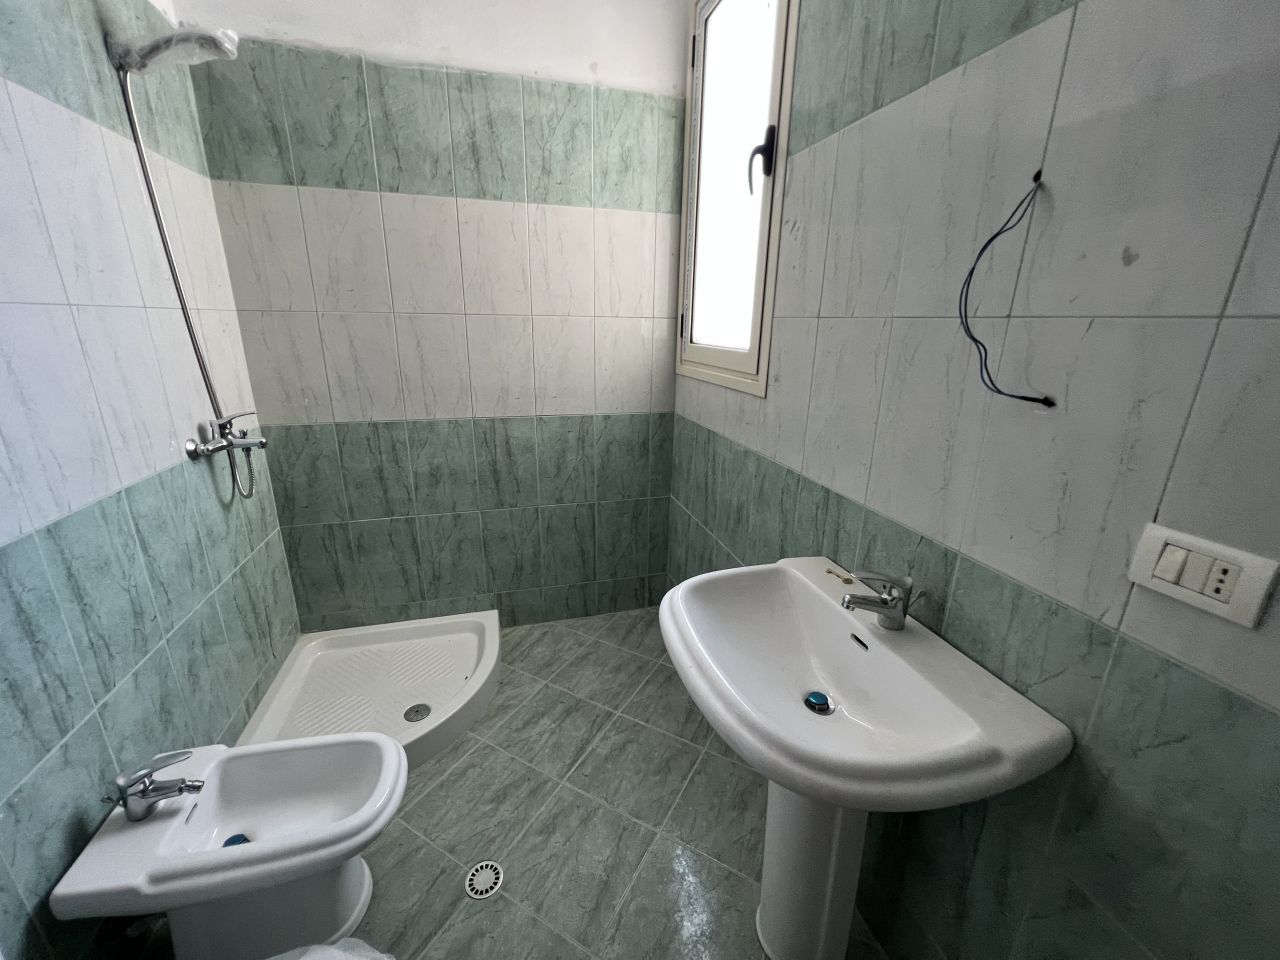 2 Bedroom Apartment In Vlore Albania For Sale In A Good Neighborhood